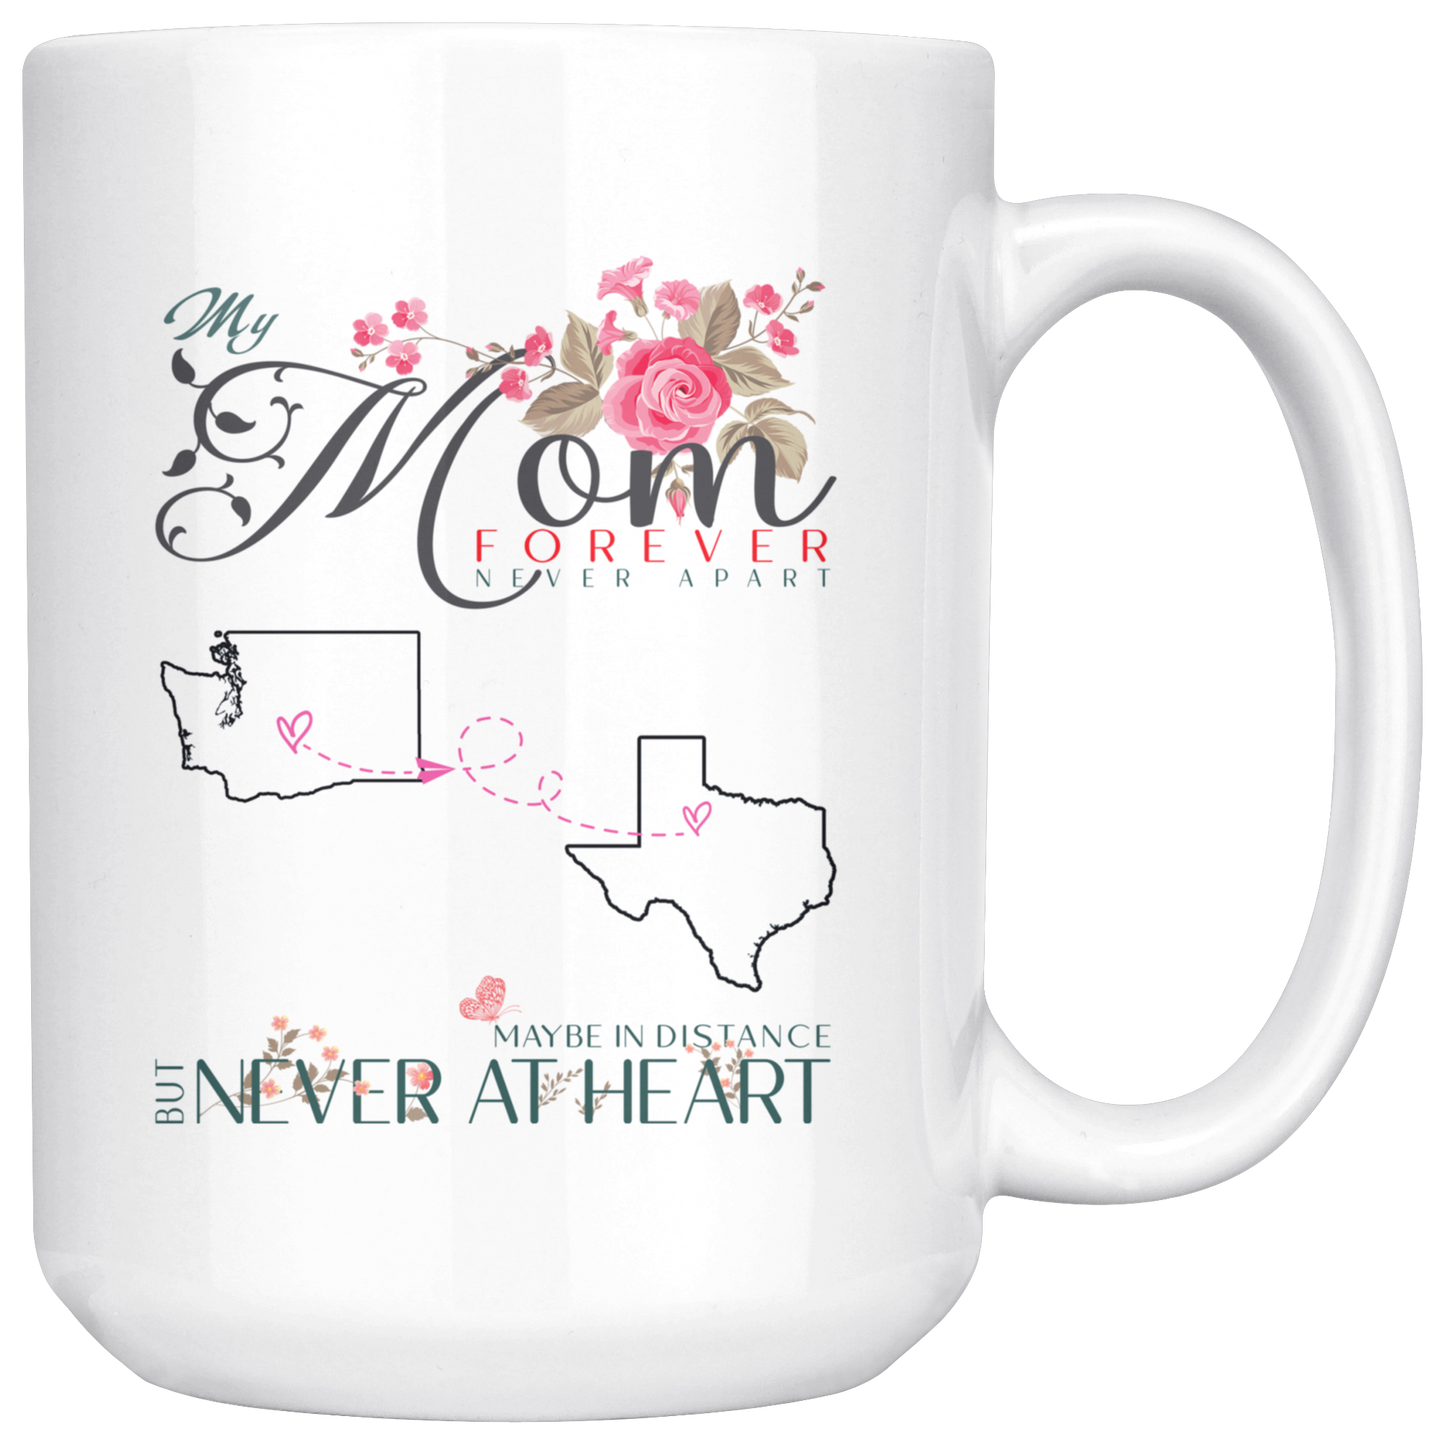 M-20321571-sp-23548 - [ Washington | Texas ]Personalized Mothers Day Coffee Mug - My Mom Forever Never A